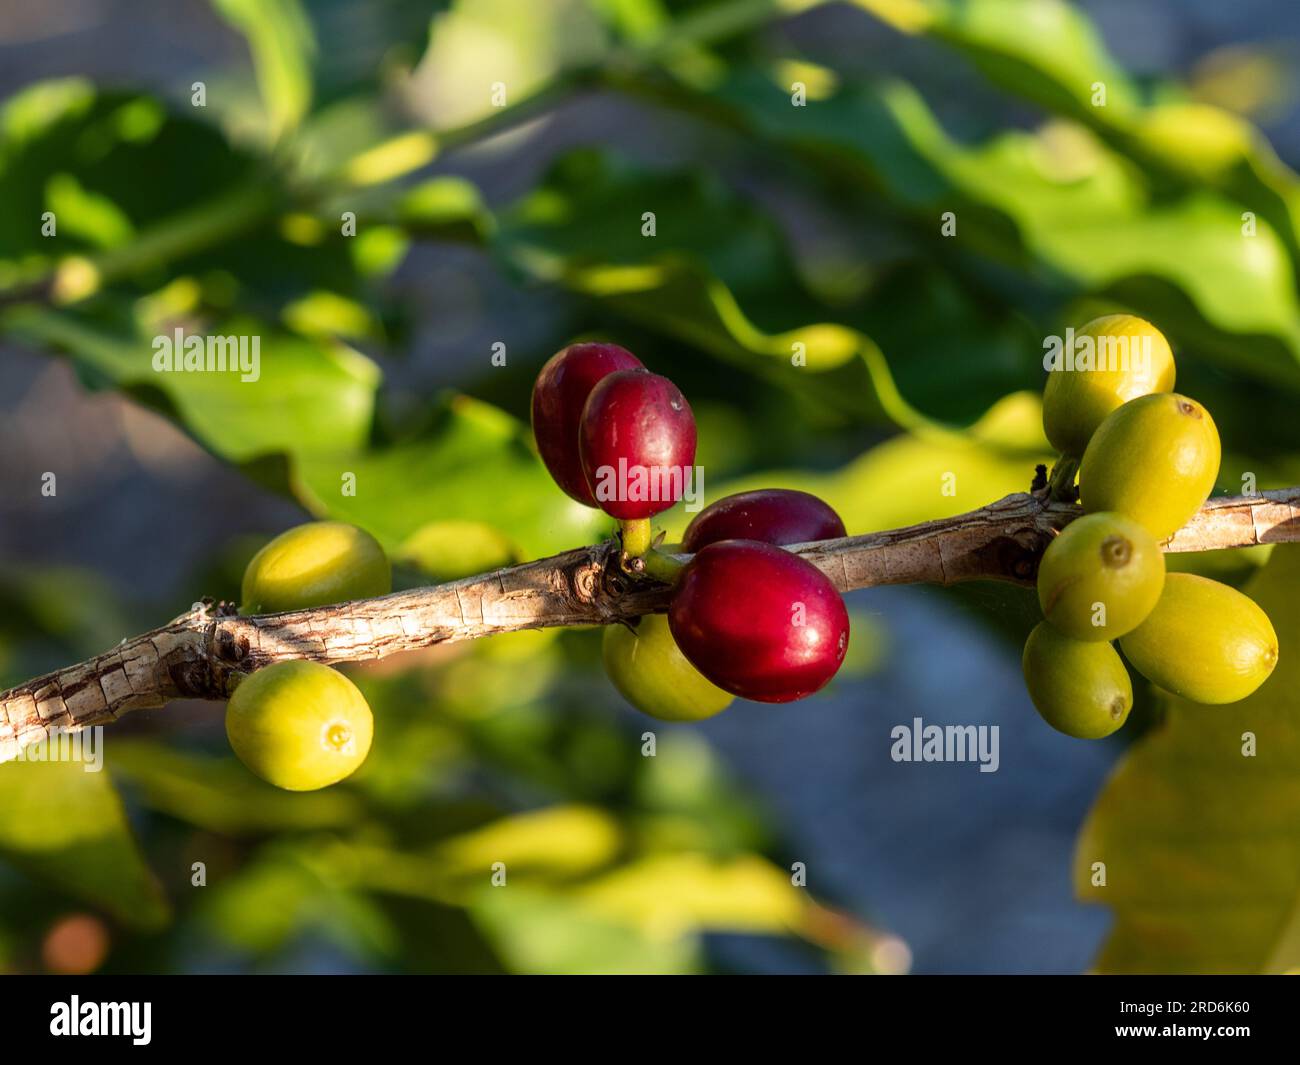 Coffee Cherries growing on a stem, clusters of different stages of ripeness, beans or seeds inside, red and green Stock Photo